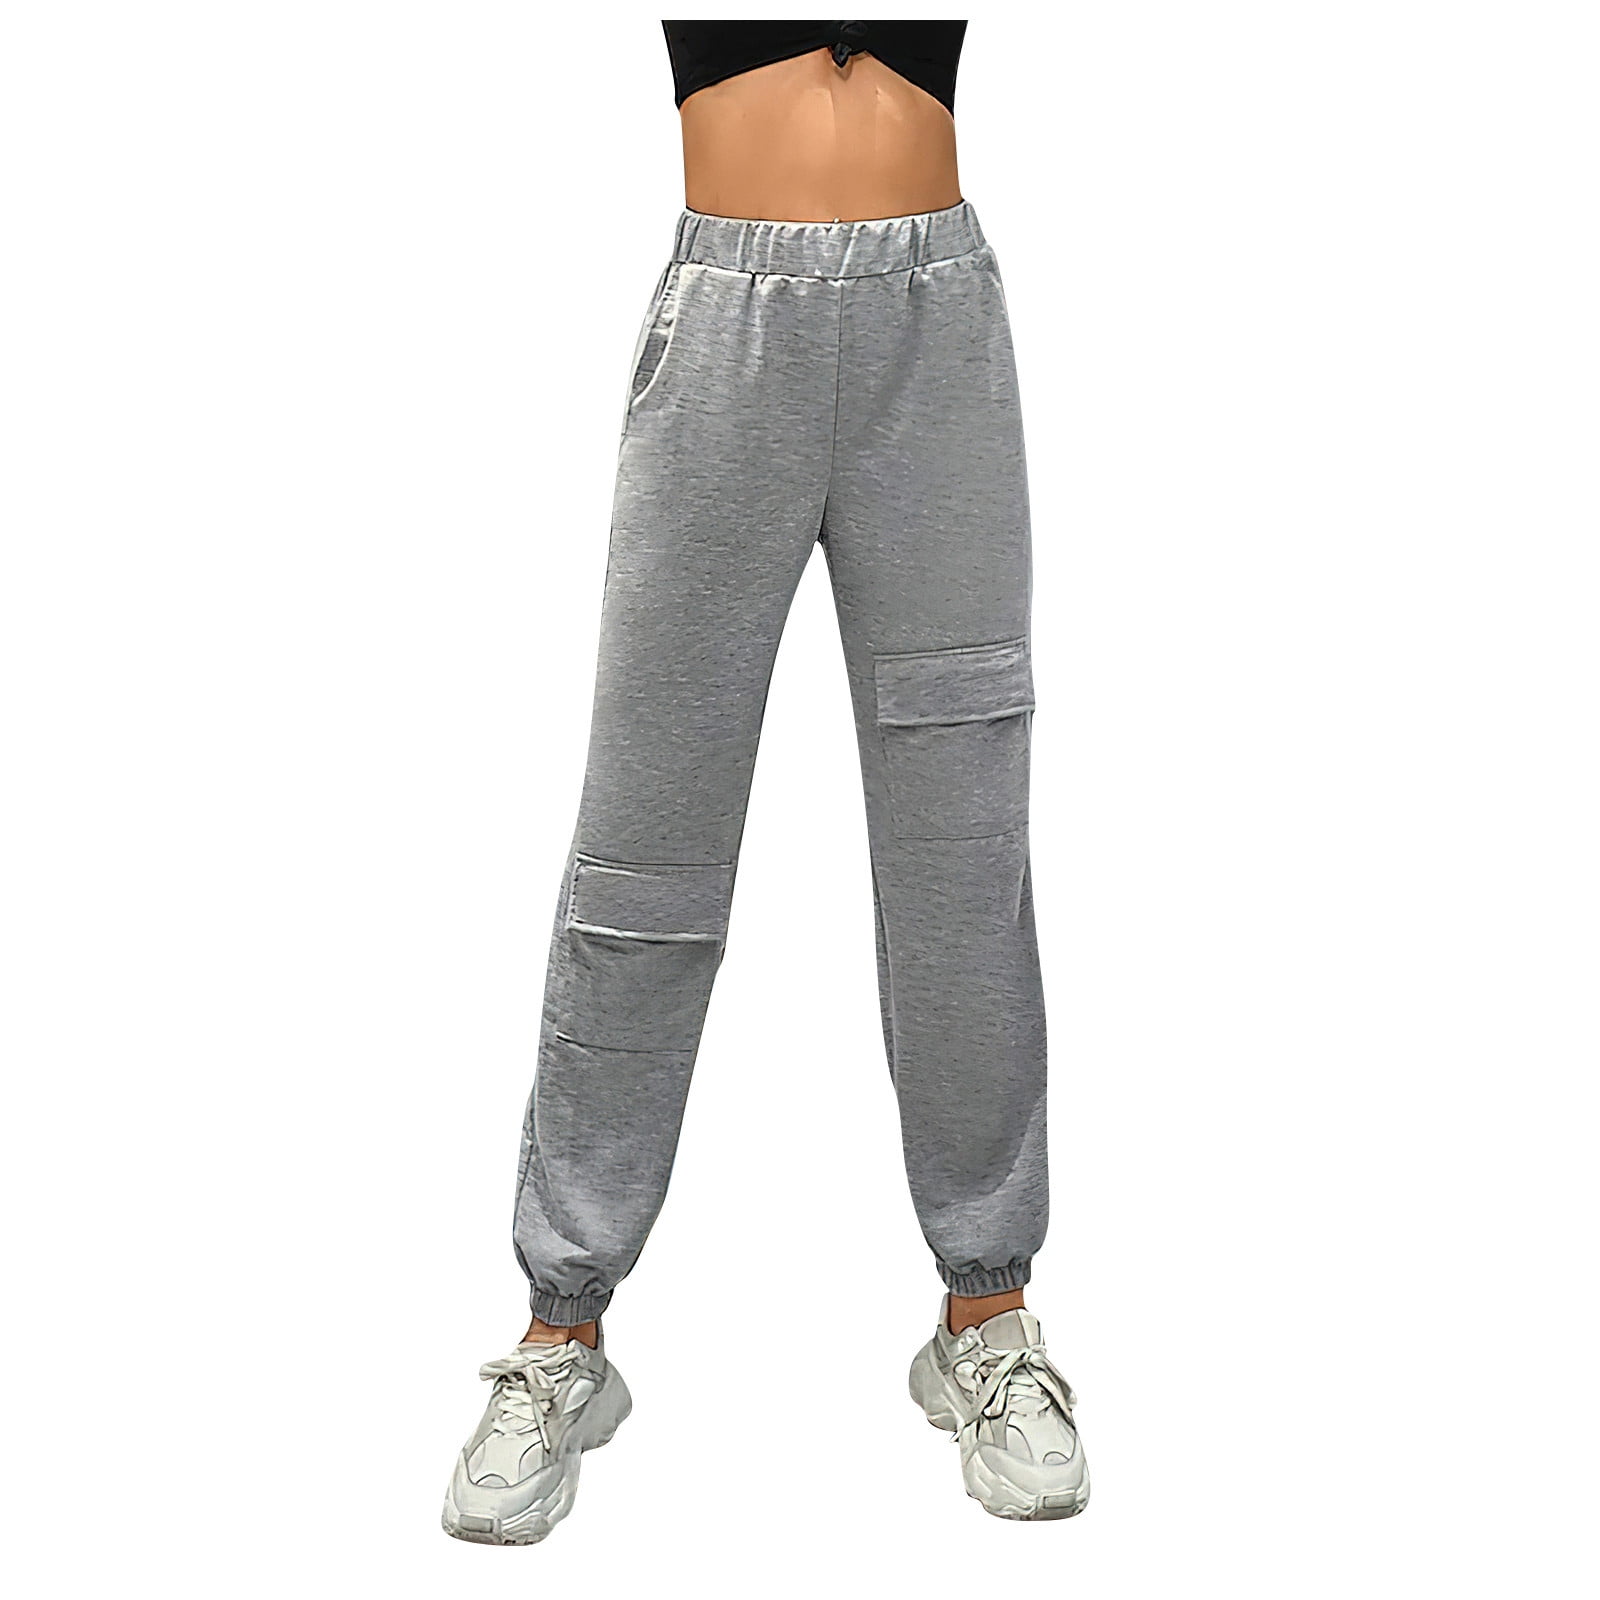 Jogger Pants Street Style Looks For Women 2023 - FashionMakesTrends.com